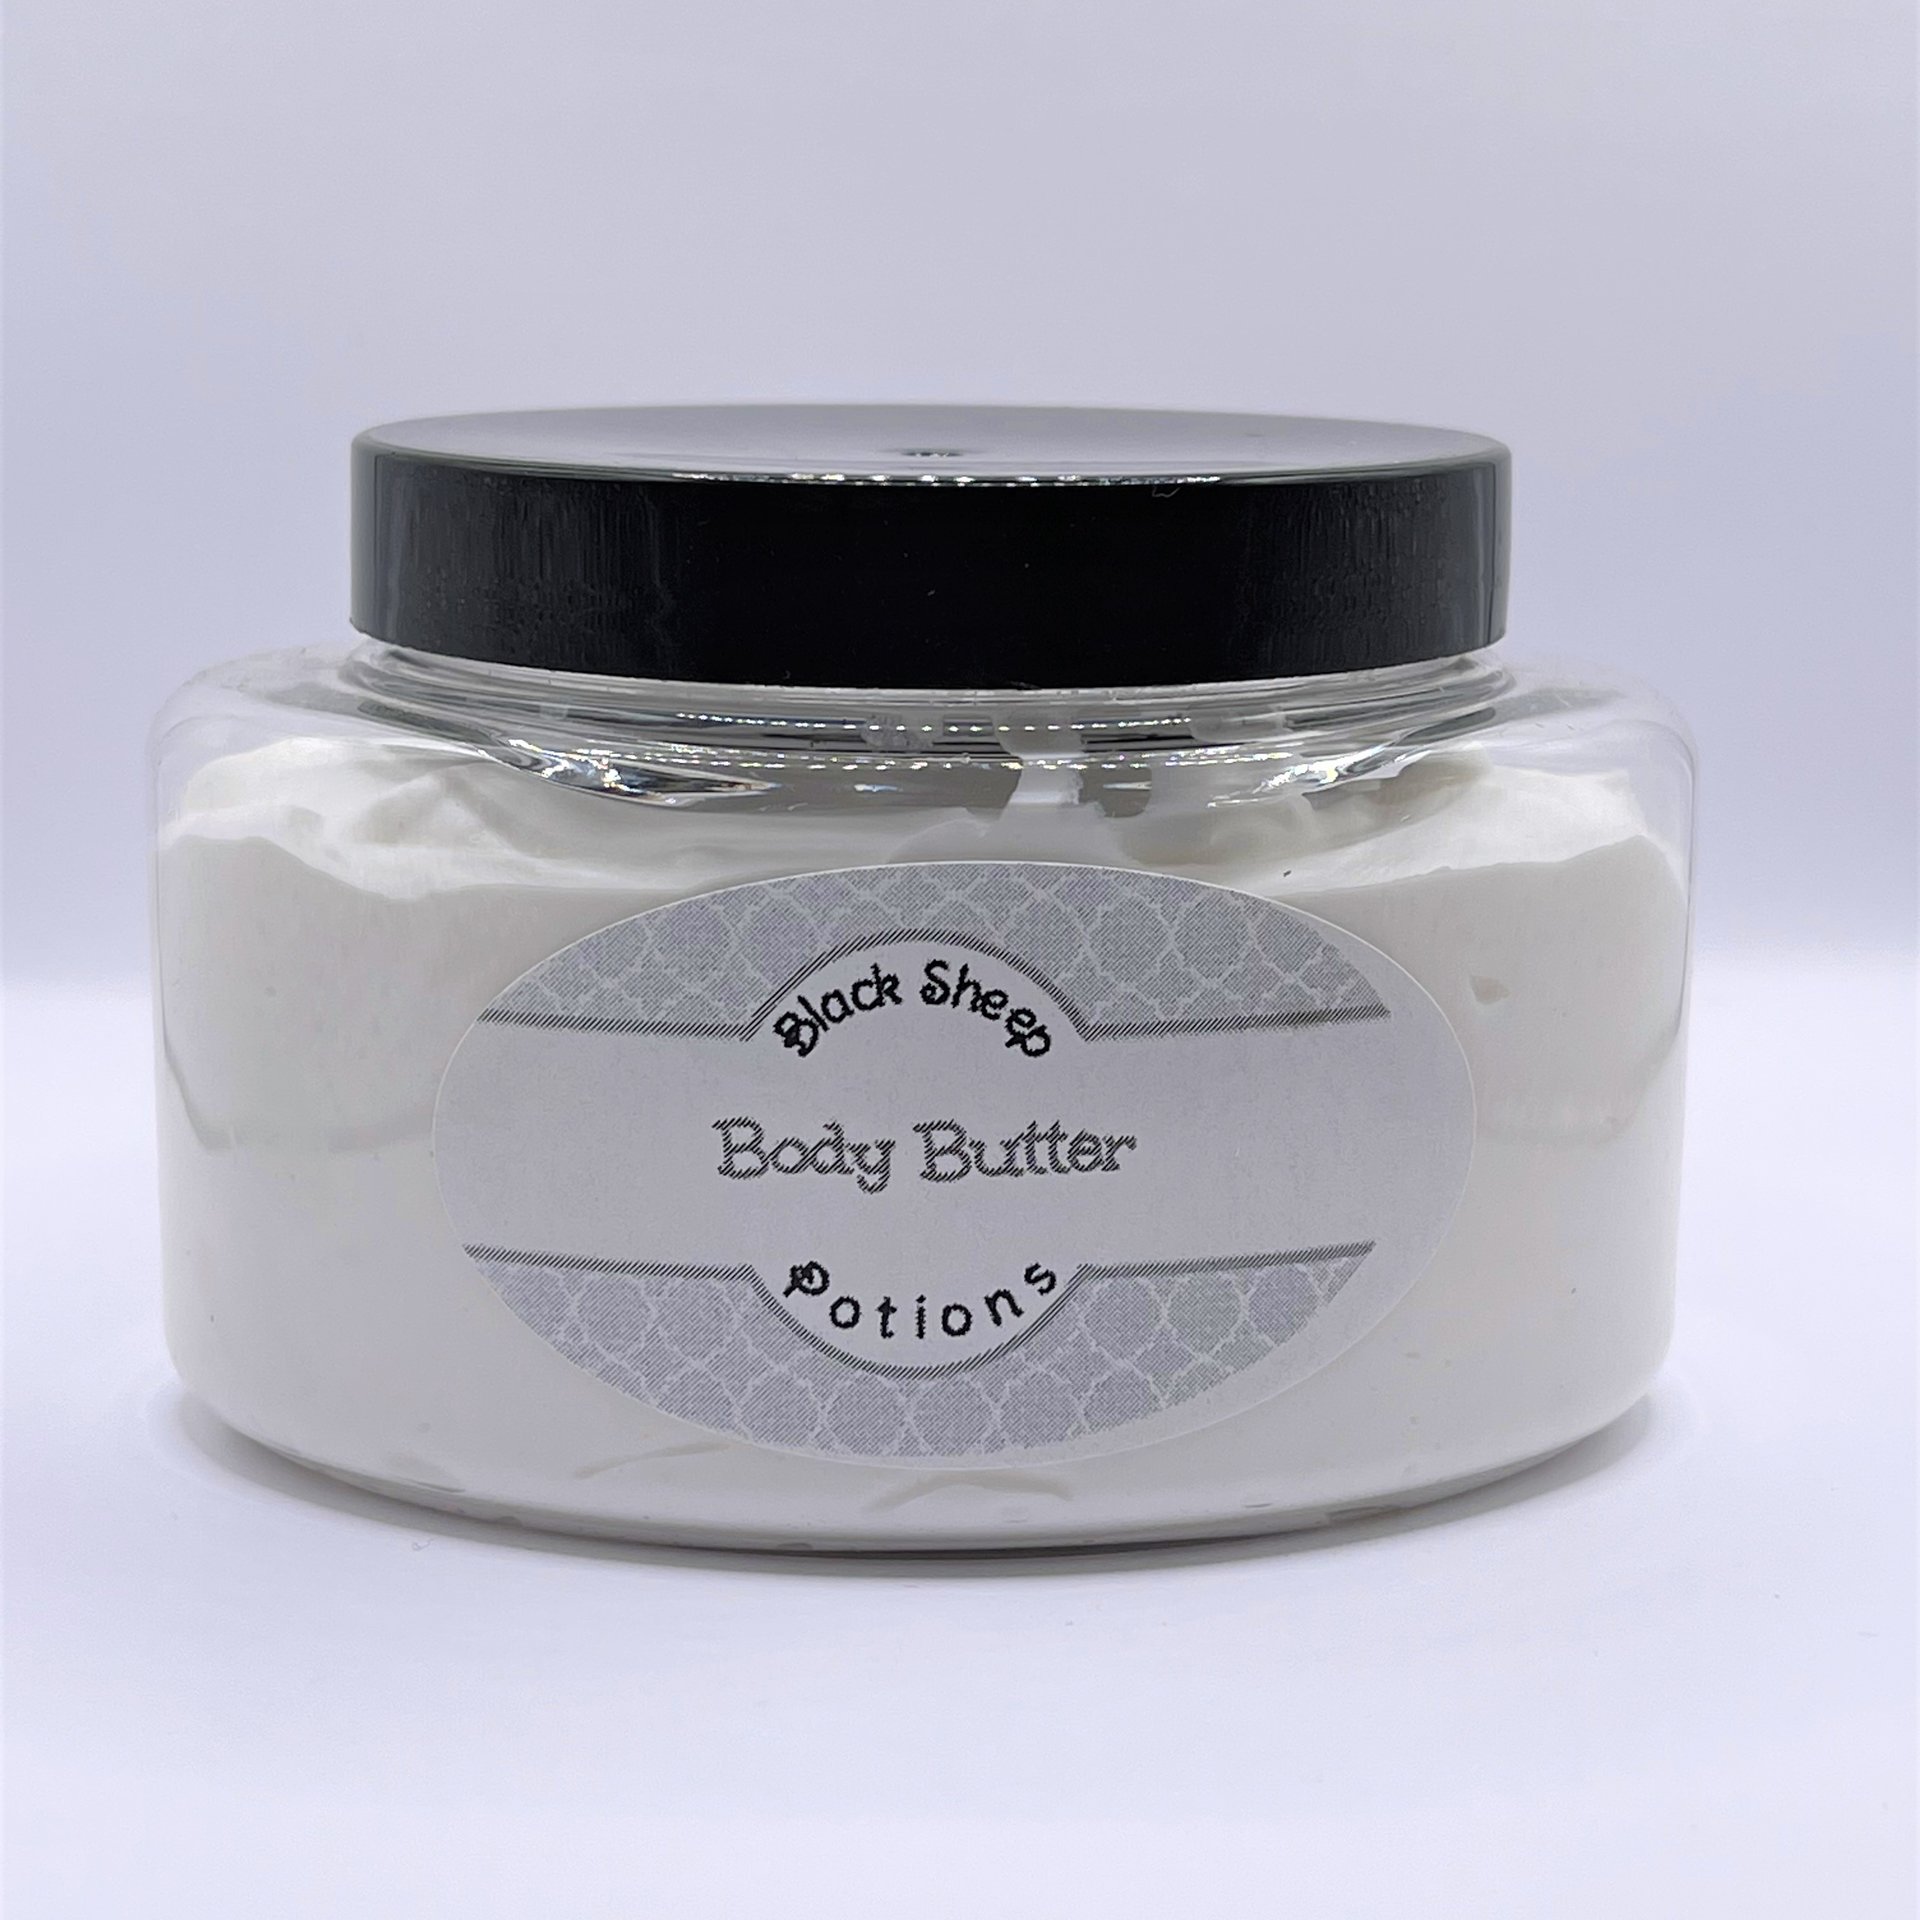 Whipped Body Butter, 6 oz